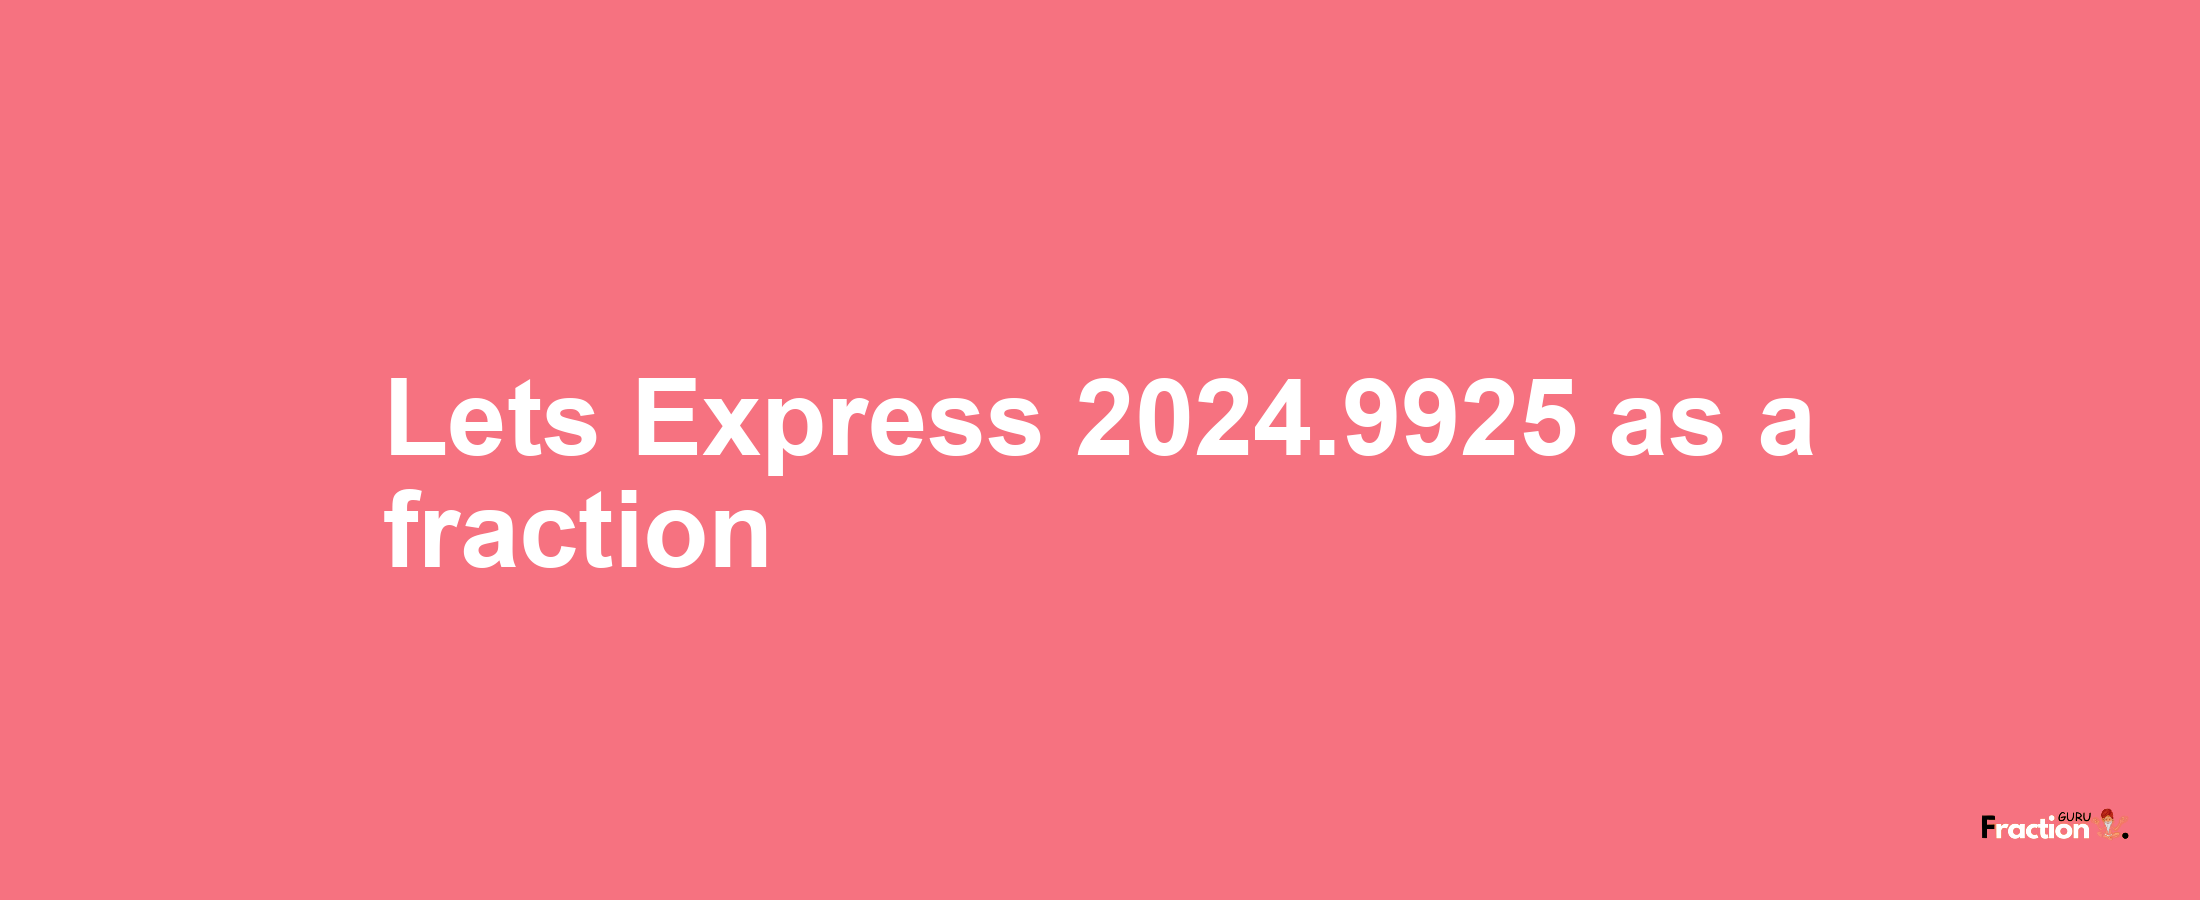 Lets Express 2024.9925 as afraction